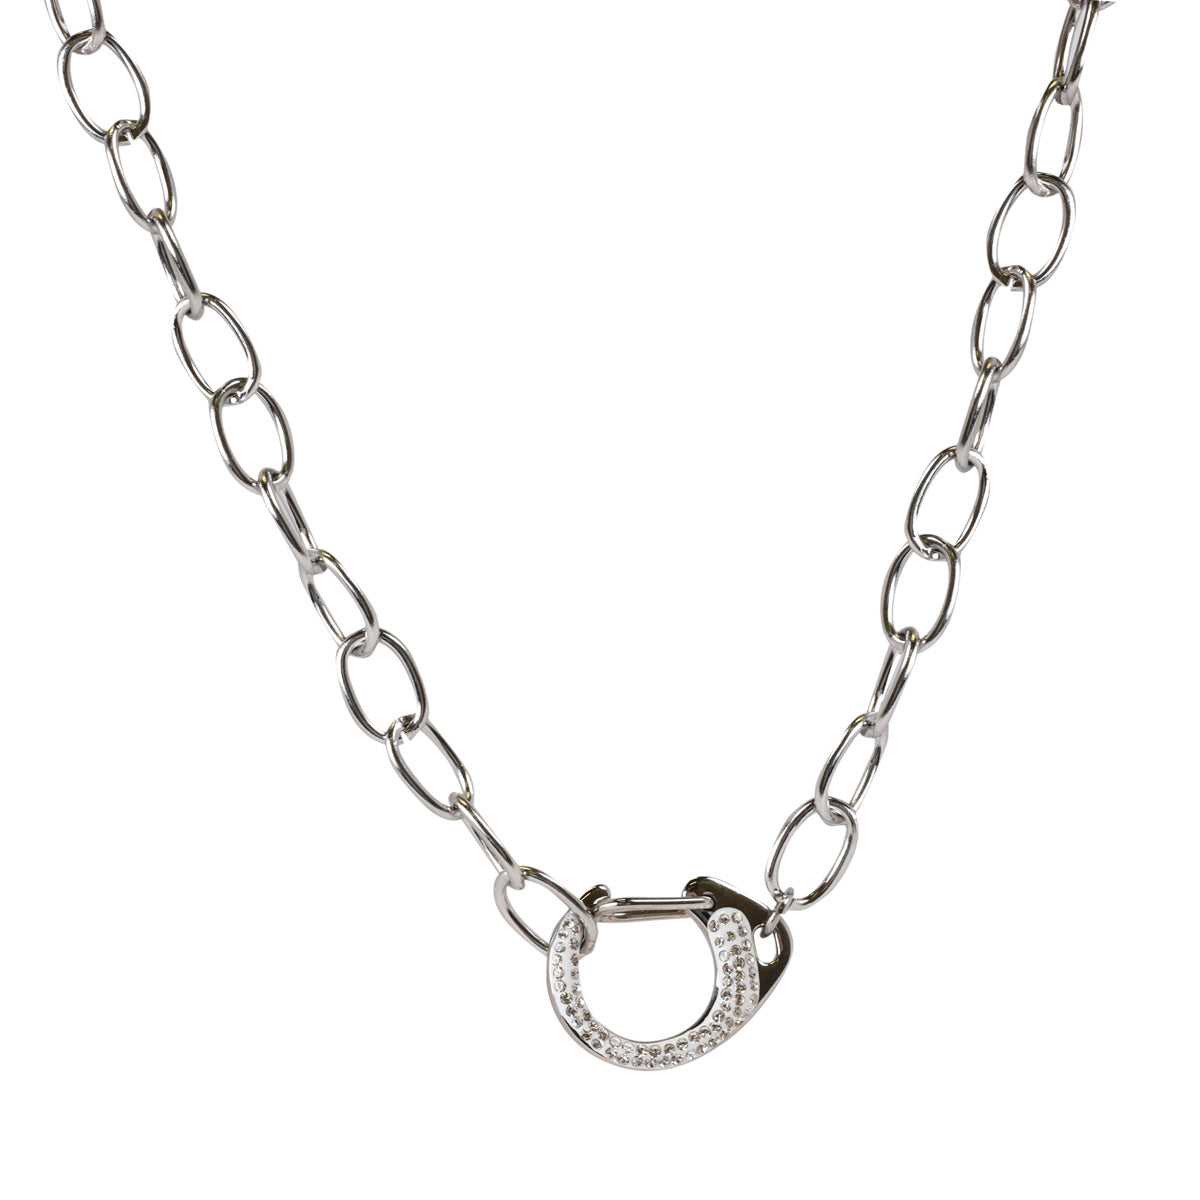 Cable chain necklace with quick lock 42cm (steel)